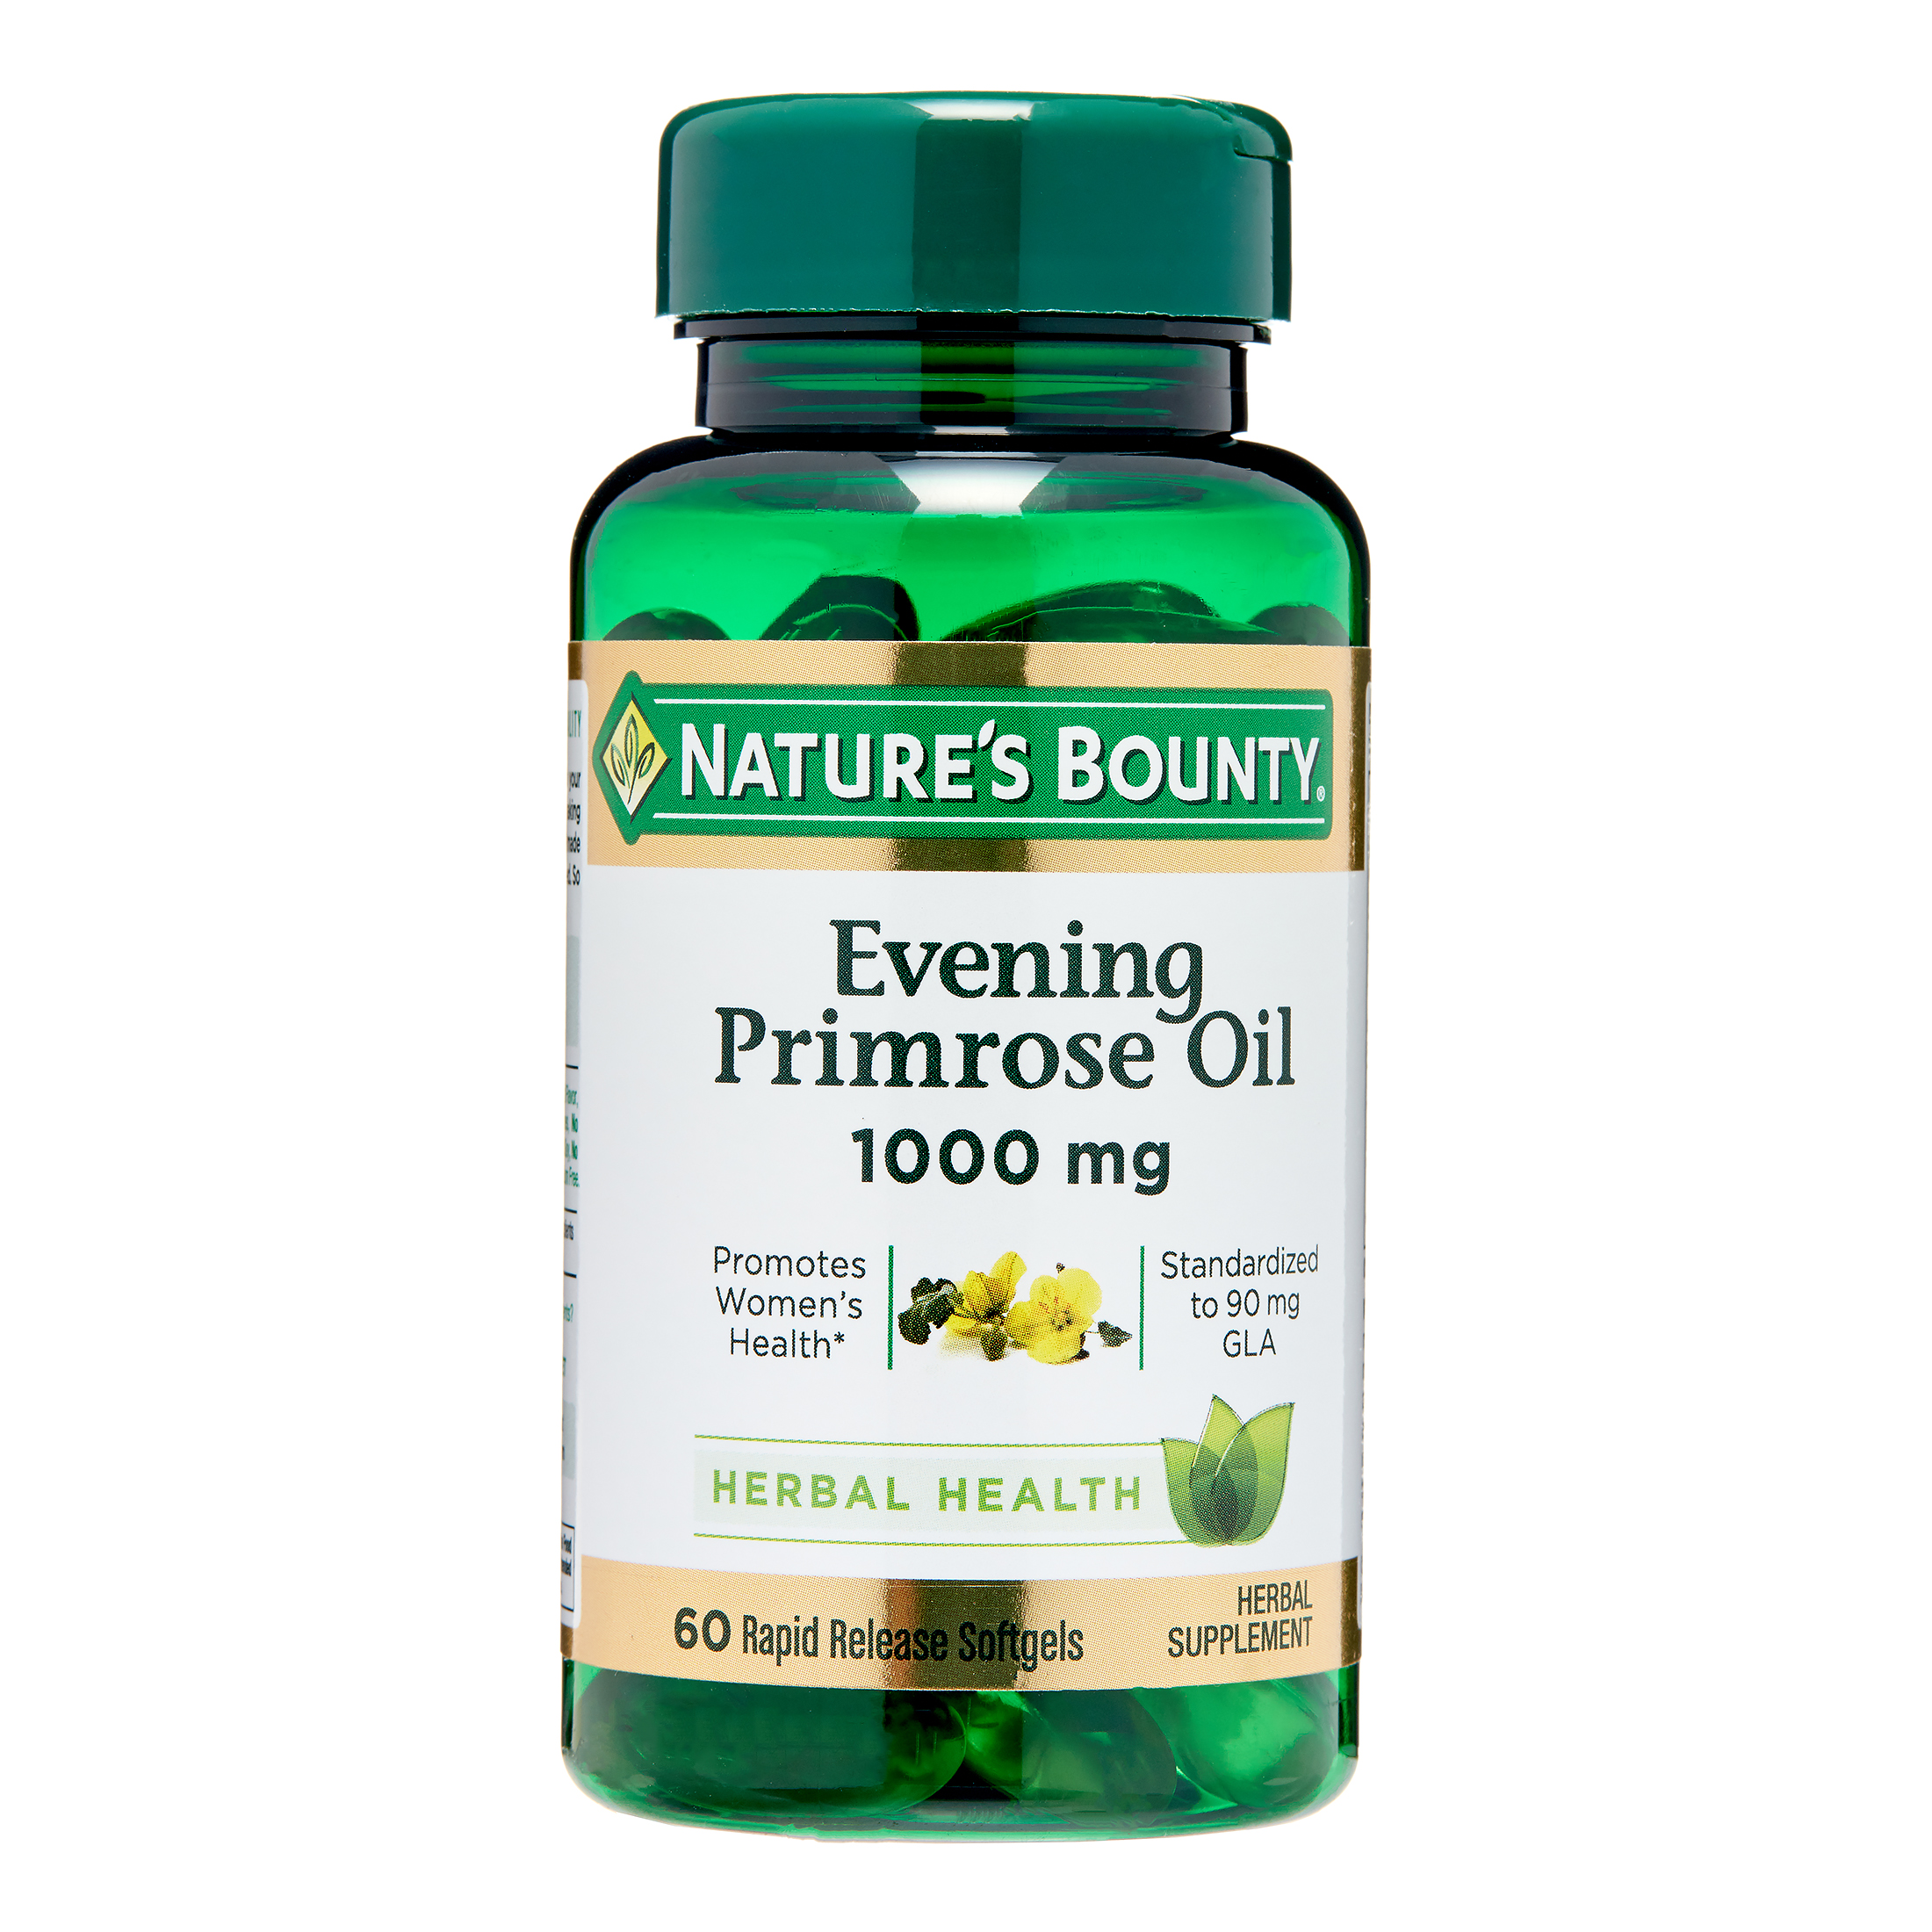 Nature's Bounty Evening Primrose Oil Softgels, Herbal Supplement, 1000 Mg, 60 Ct - image 5 of 8